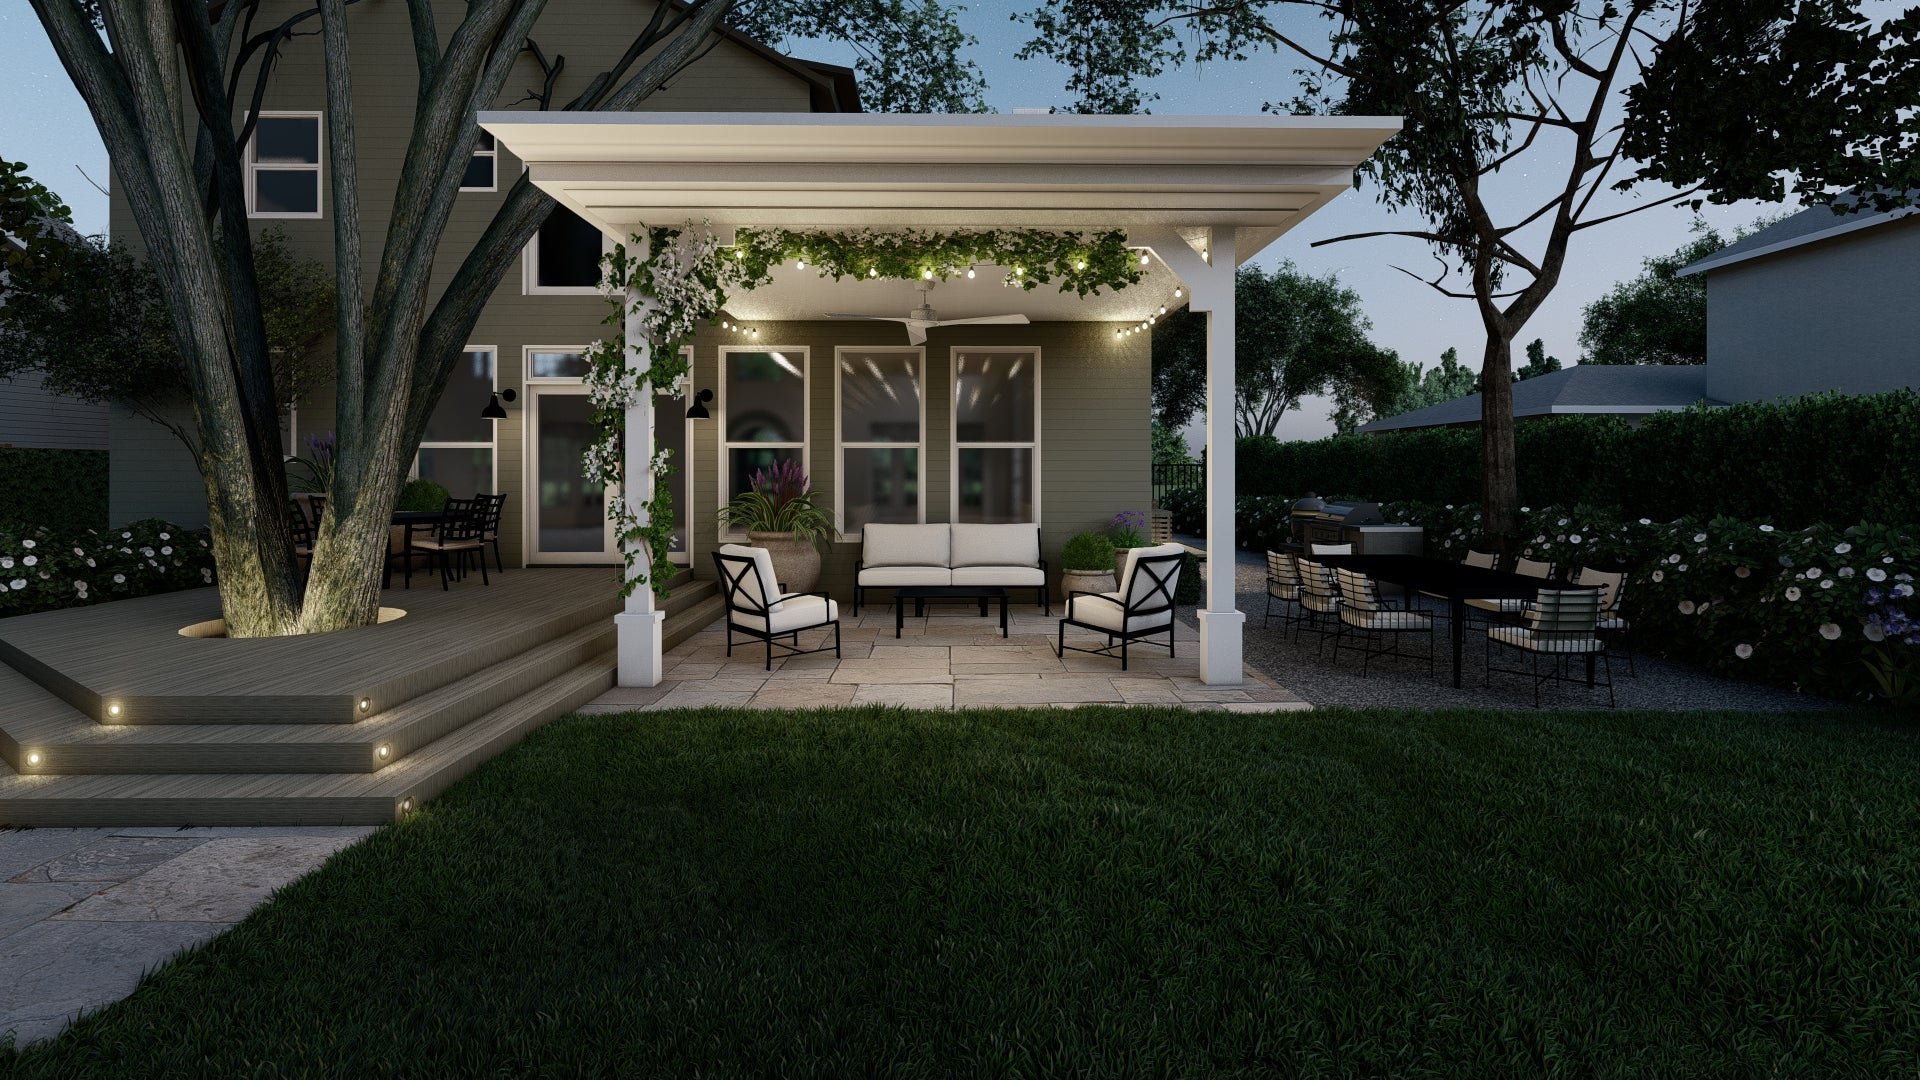 Recessed lights indicate corners in the wrap around deck stair, while string lights trace the edges of the pergola.